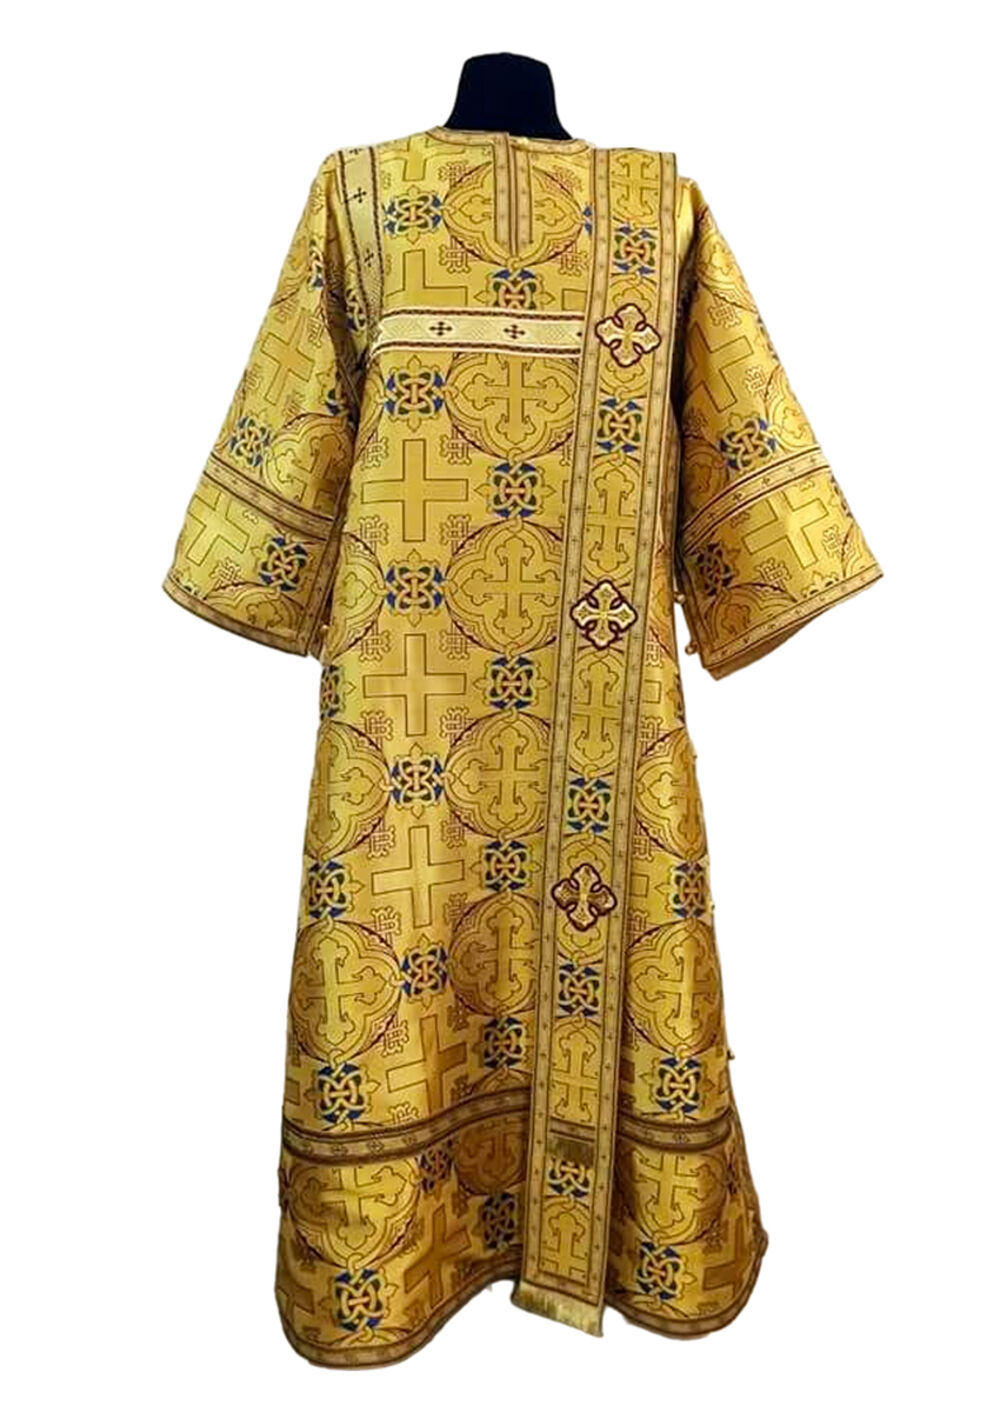 Vestment of Deacon with orarion